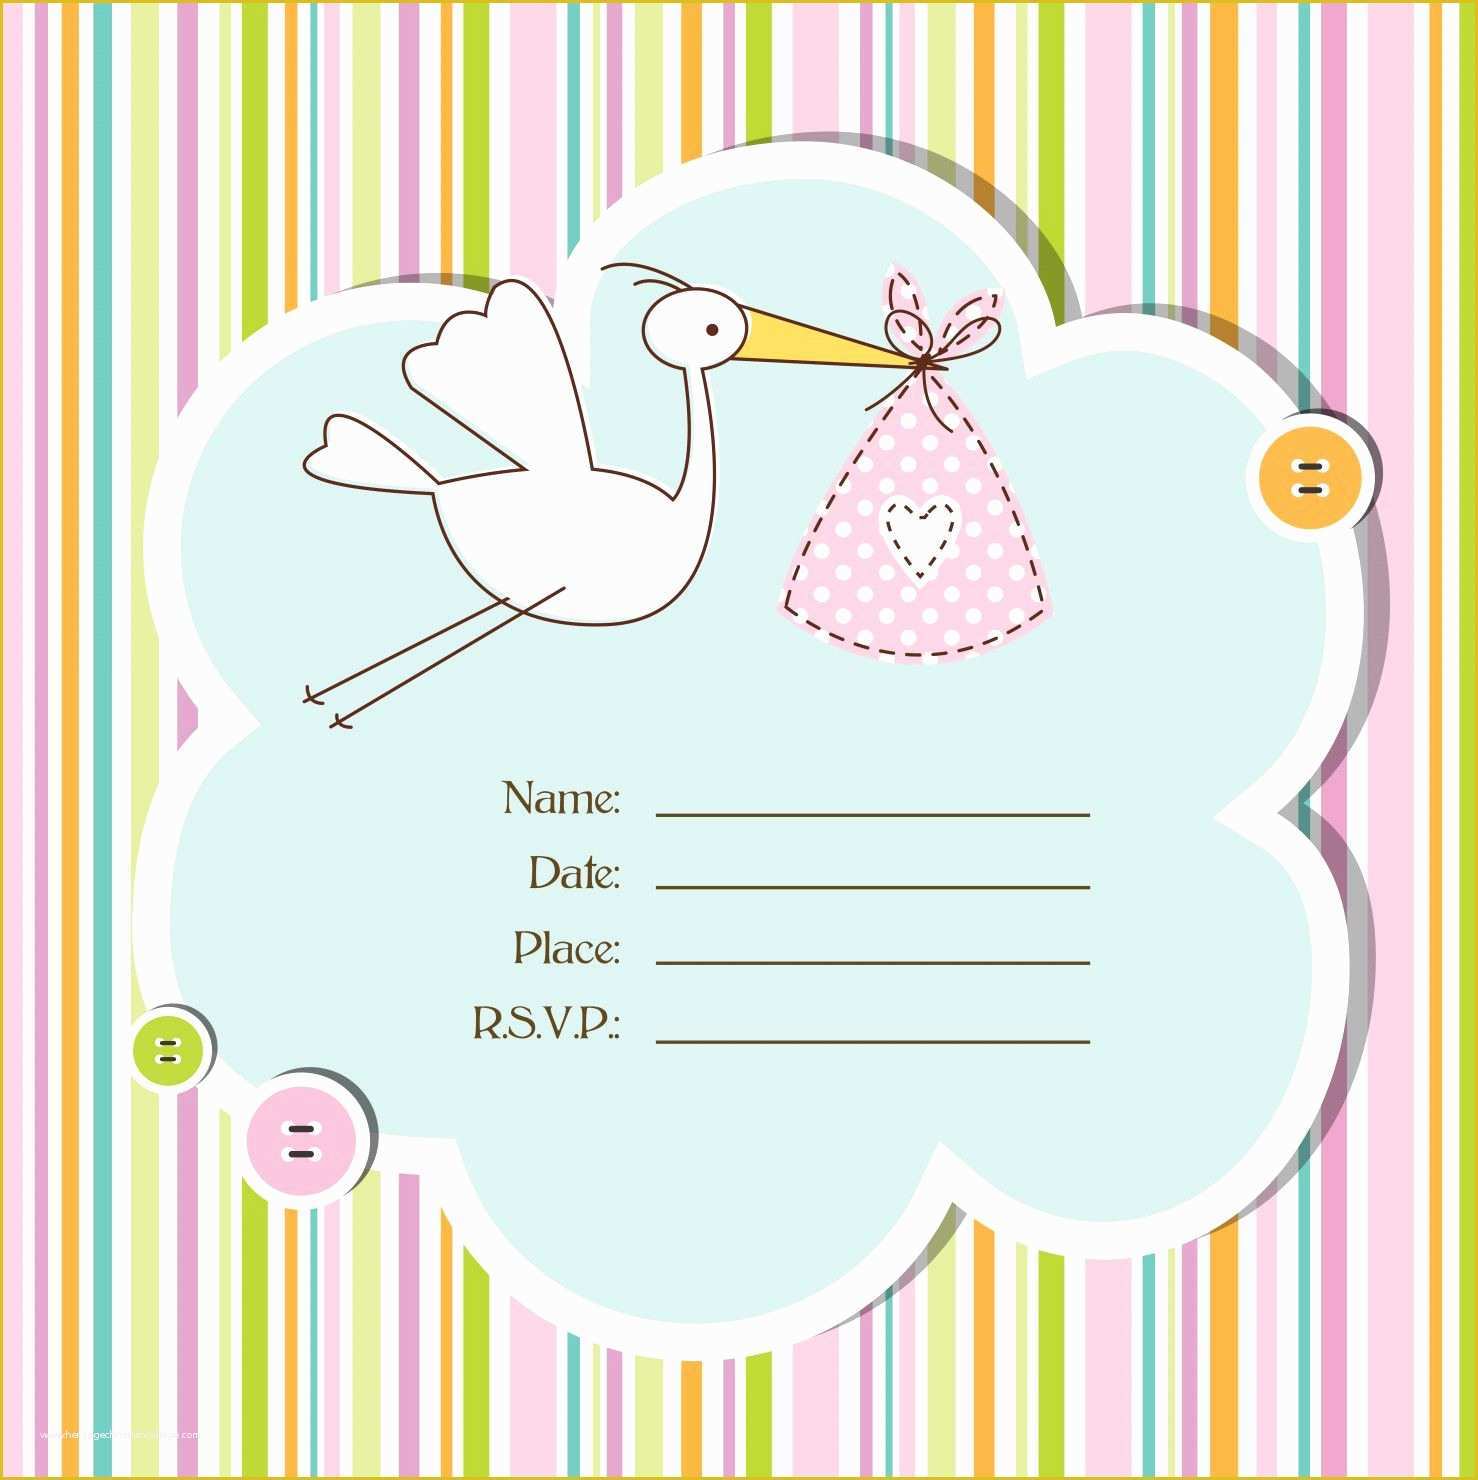 Baby Shower Card Template Free Of Baby Shower Invitations Cards Designs Baby Shower